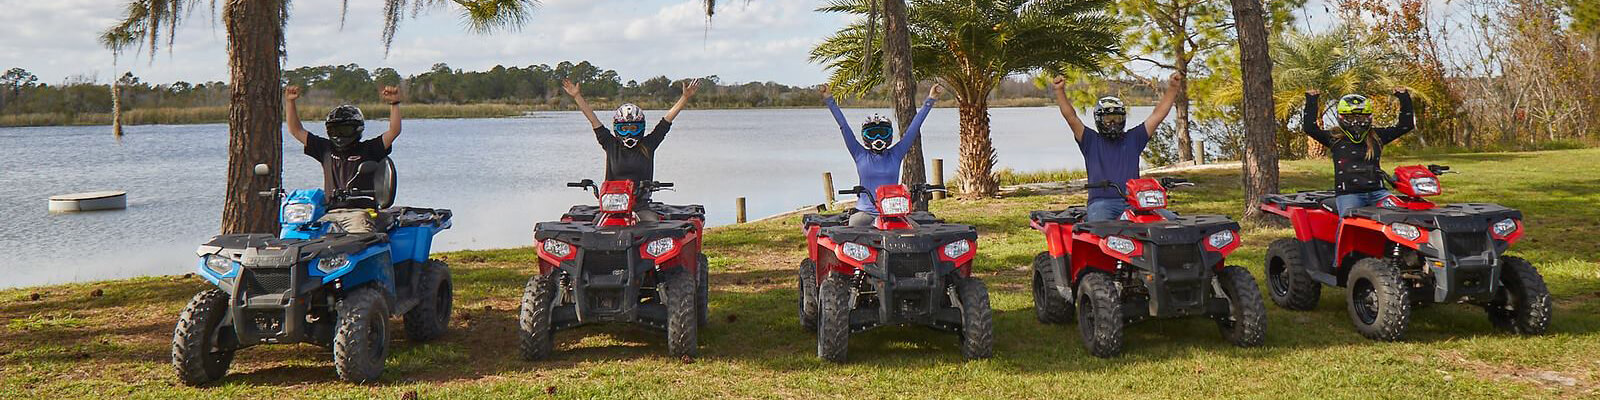 Revolution Off Road ATV Experience Coupons